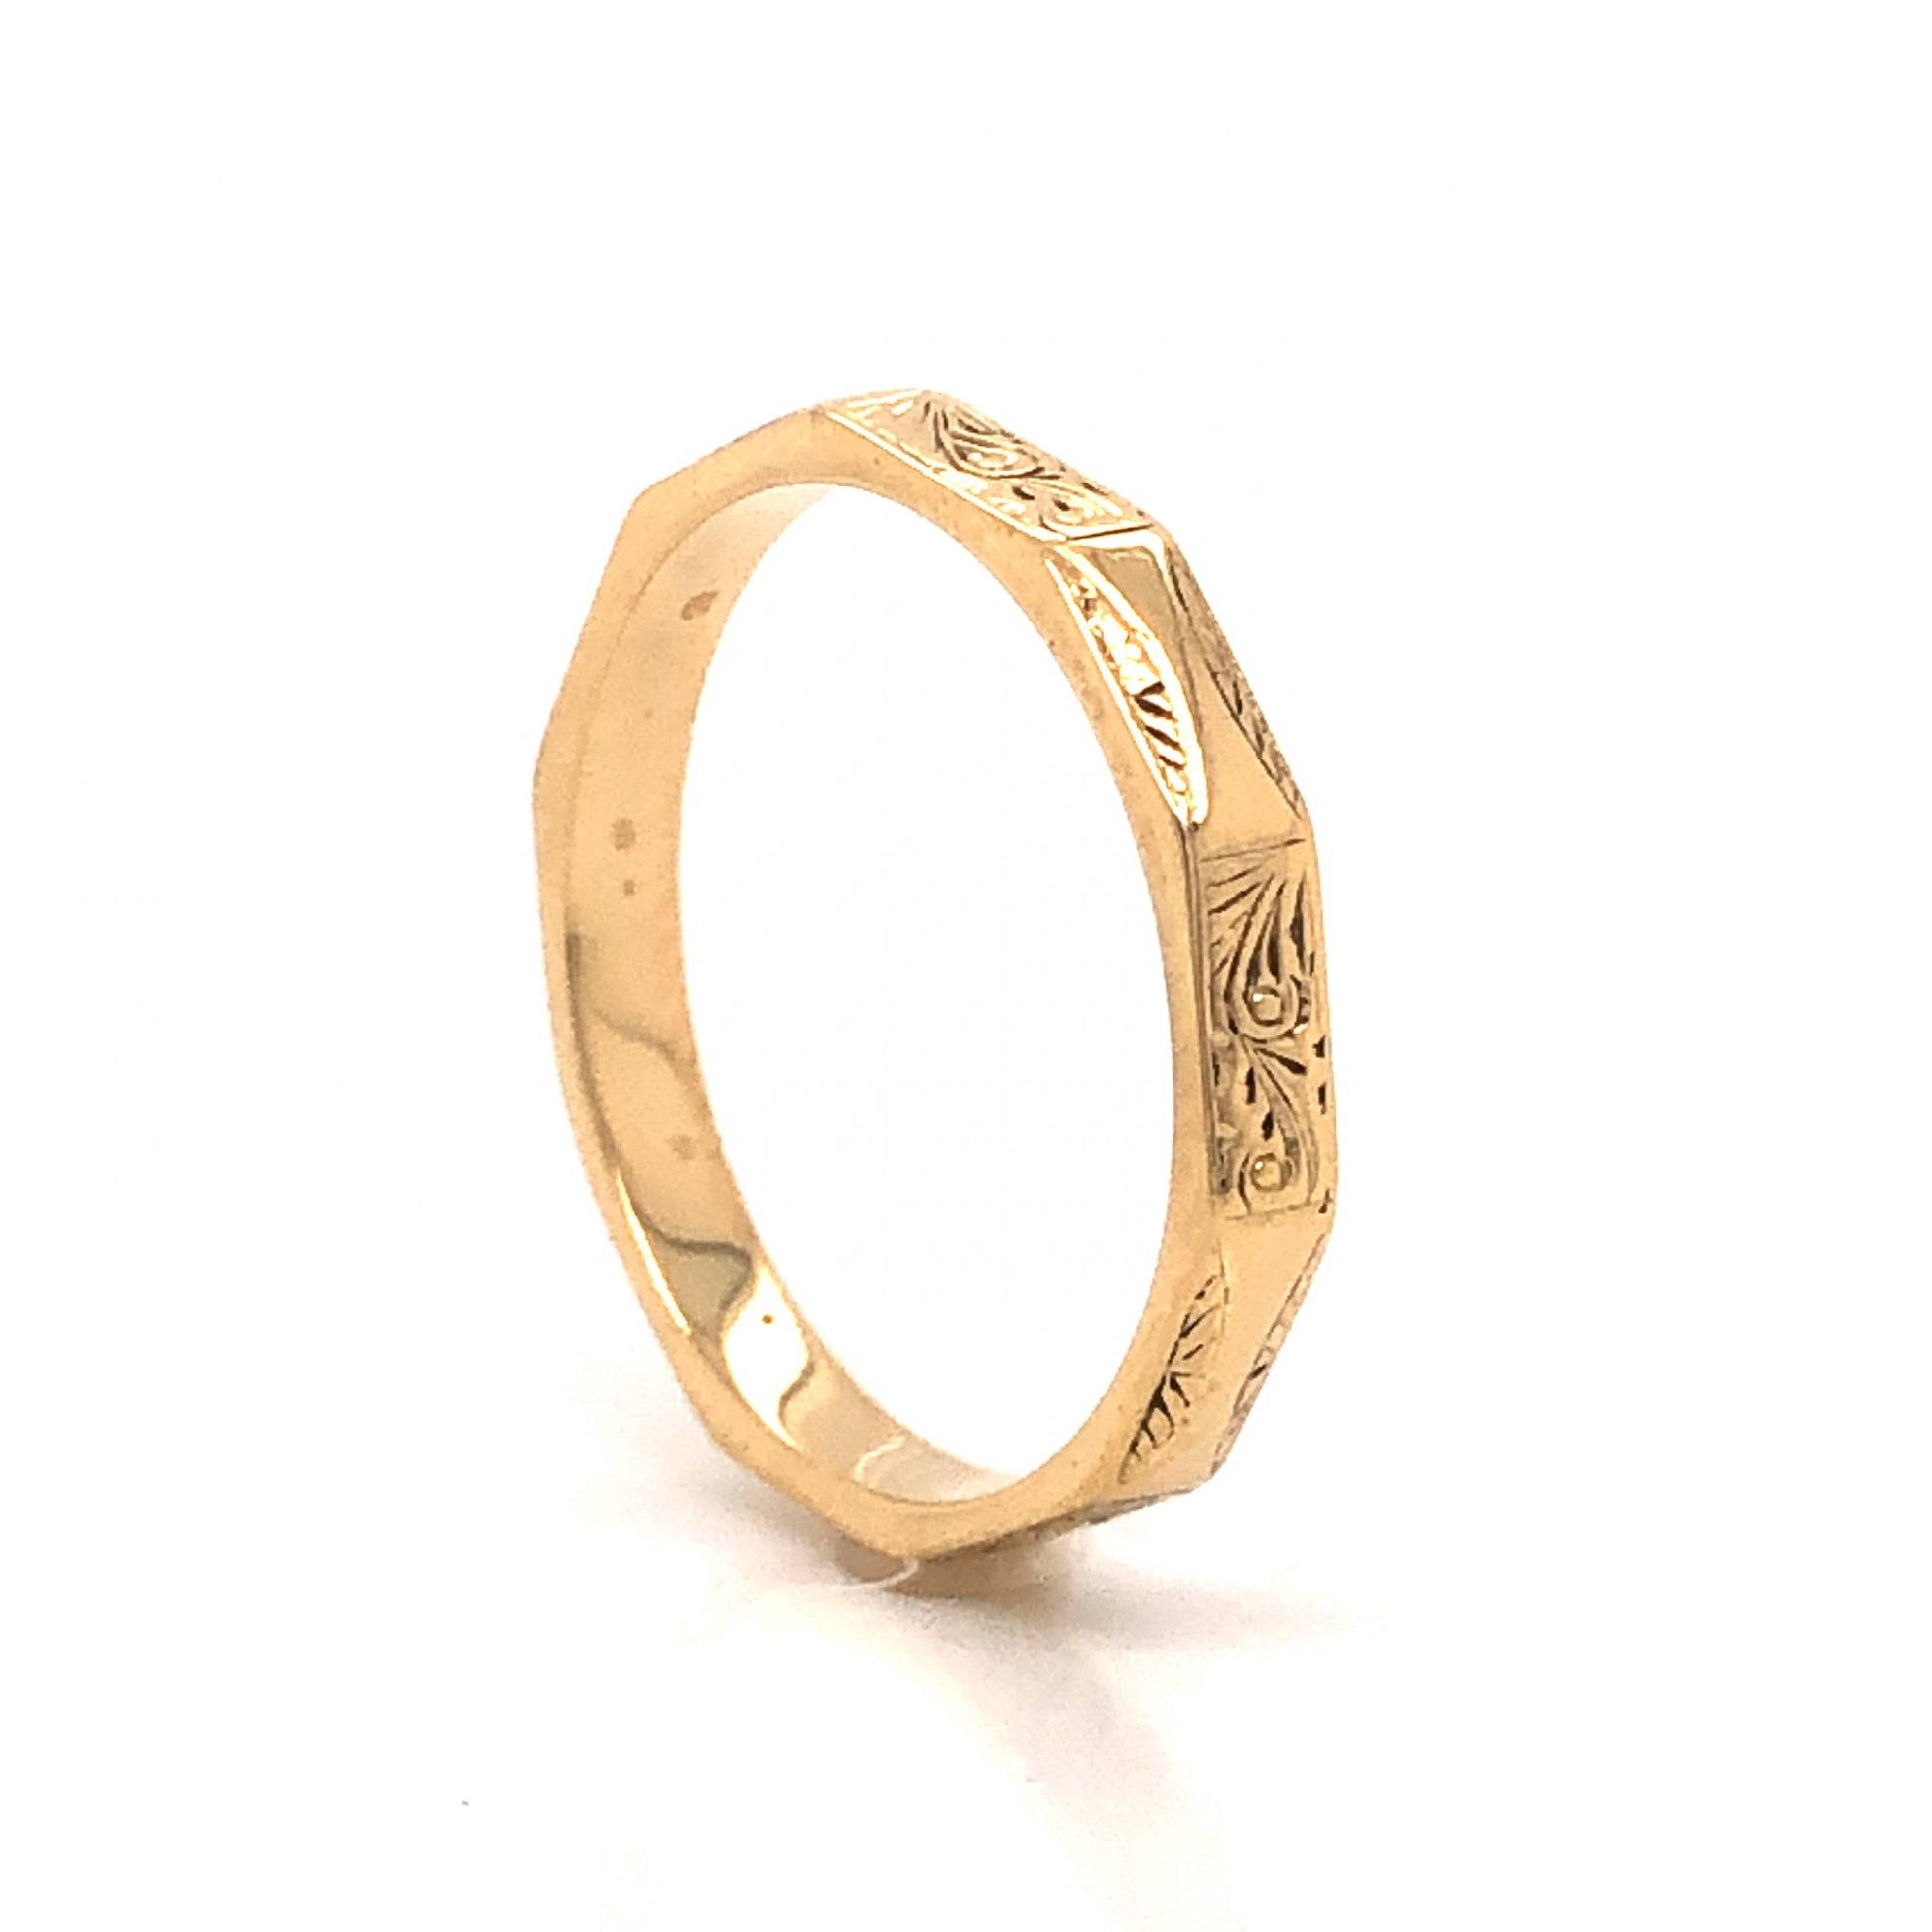 Victorian Engraved Wedding Band in 18k Yellow GoldComposition: 18 Karat Yellow Gold Ring Size: 7.25 Total Gram Weight: 2.9 g Inscription: Stamped English hallmarks, 18
      